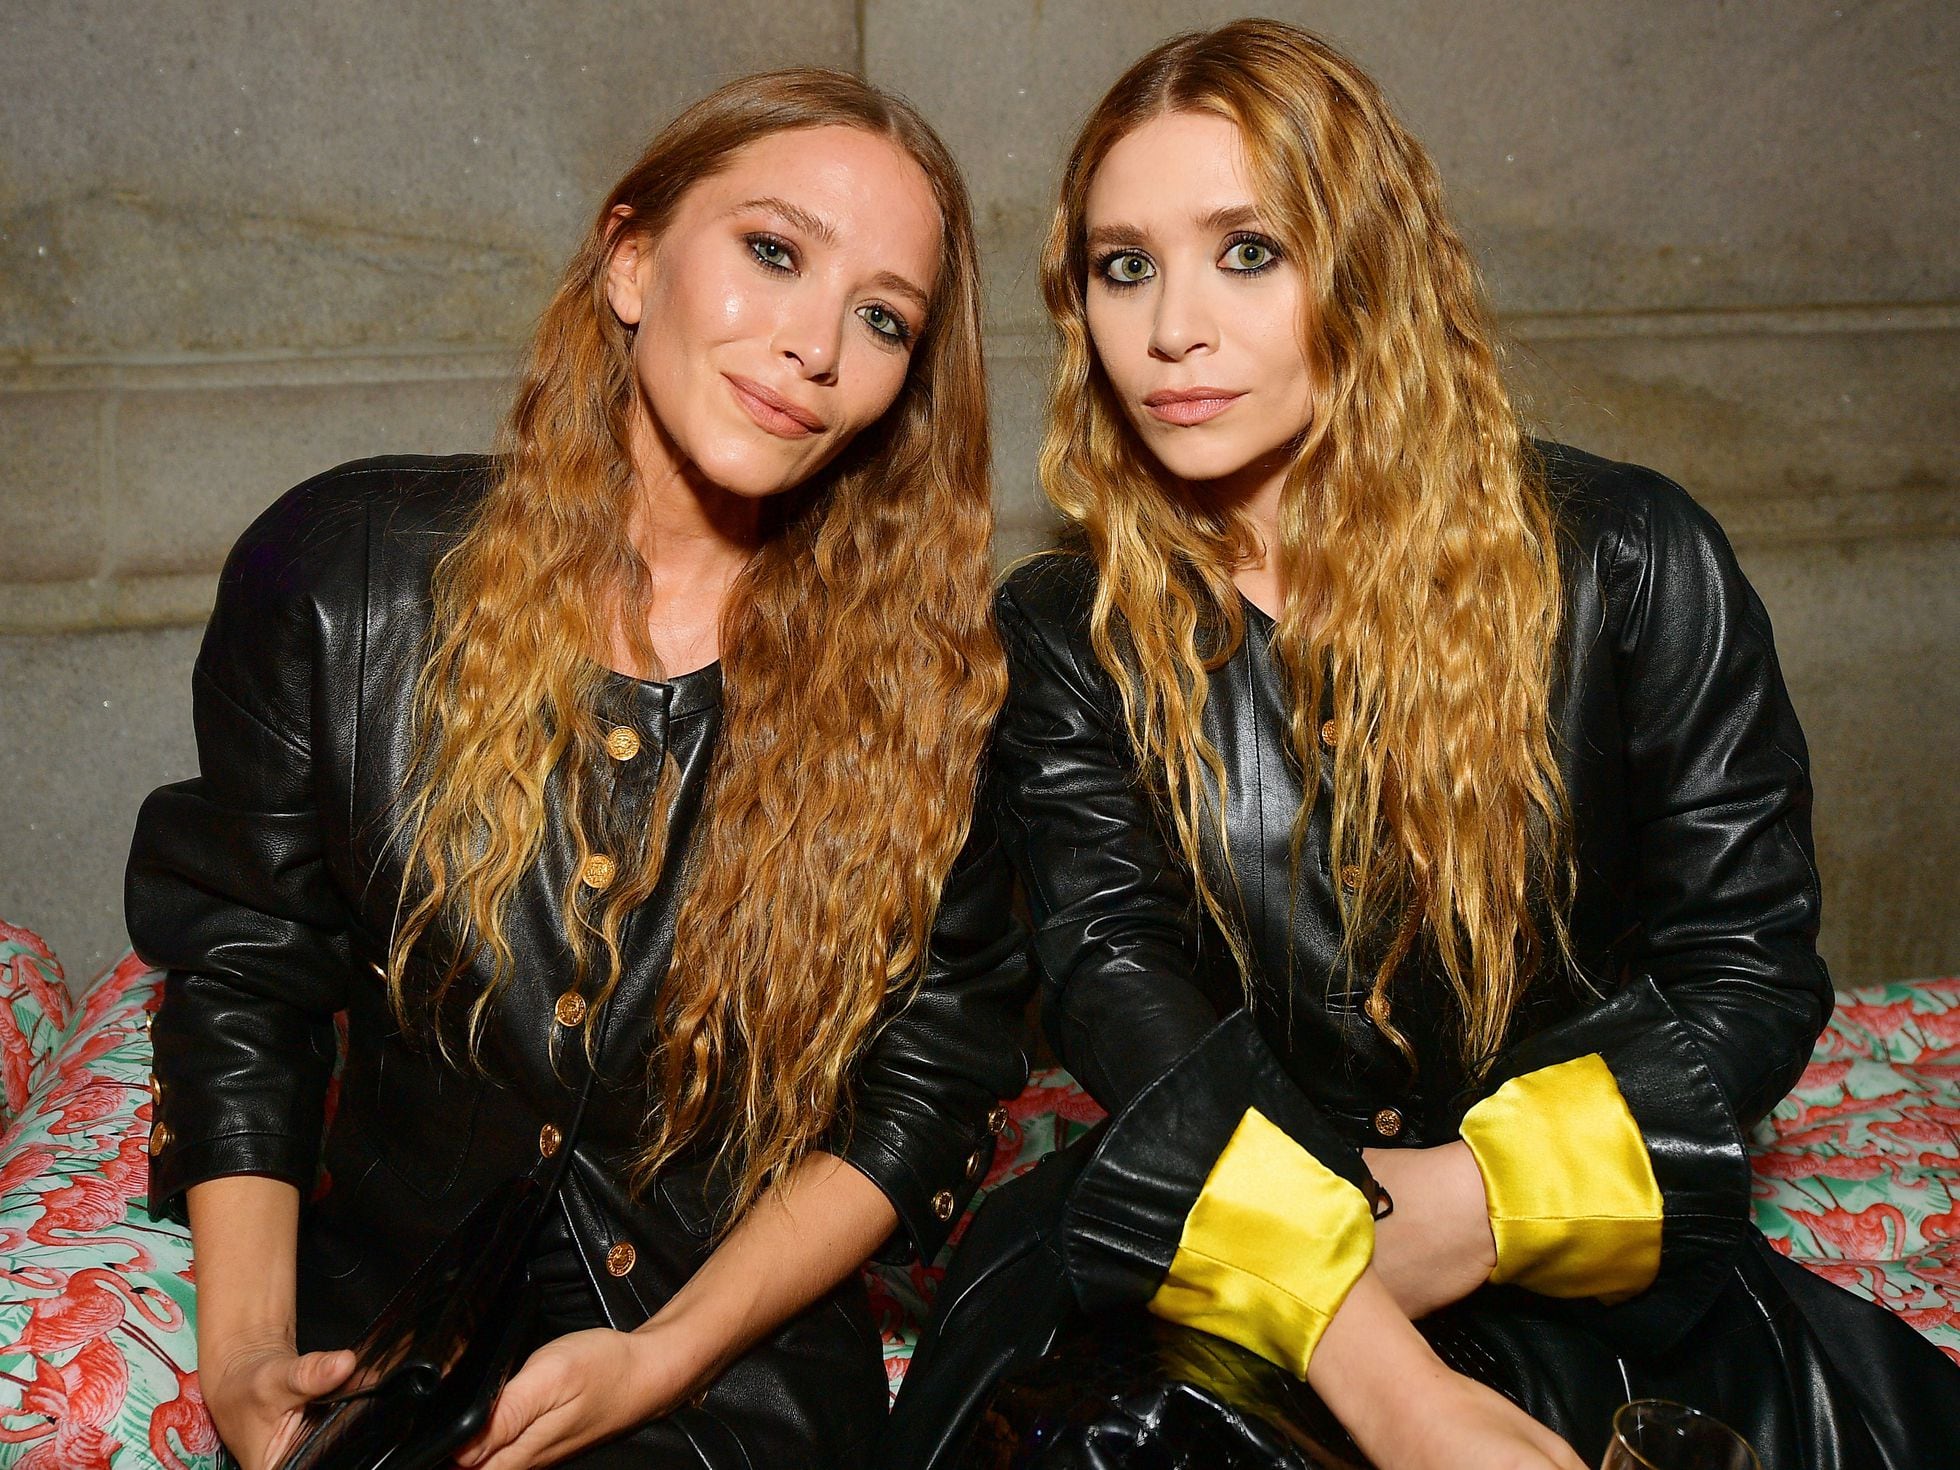 Mitt at retfærdiggøre pisk Full House: The Mary-Kate and Ashley paradigm: why are the Olsen twins  still so fascinating? | Society | EL PAÍS English